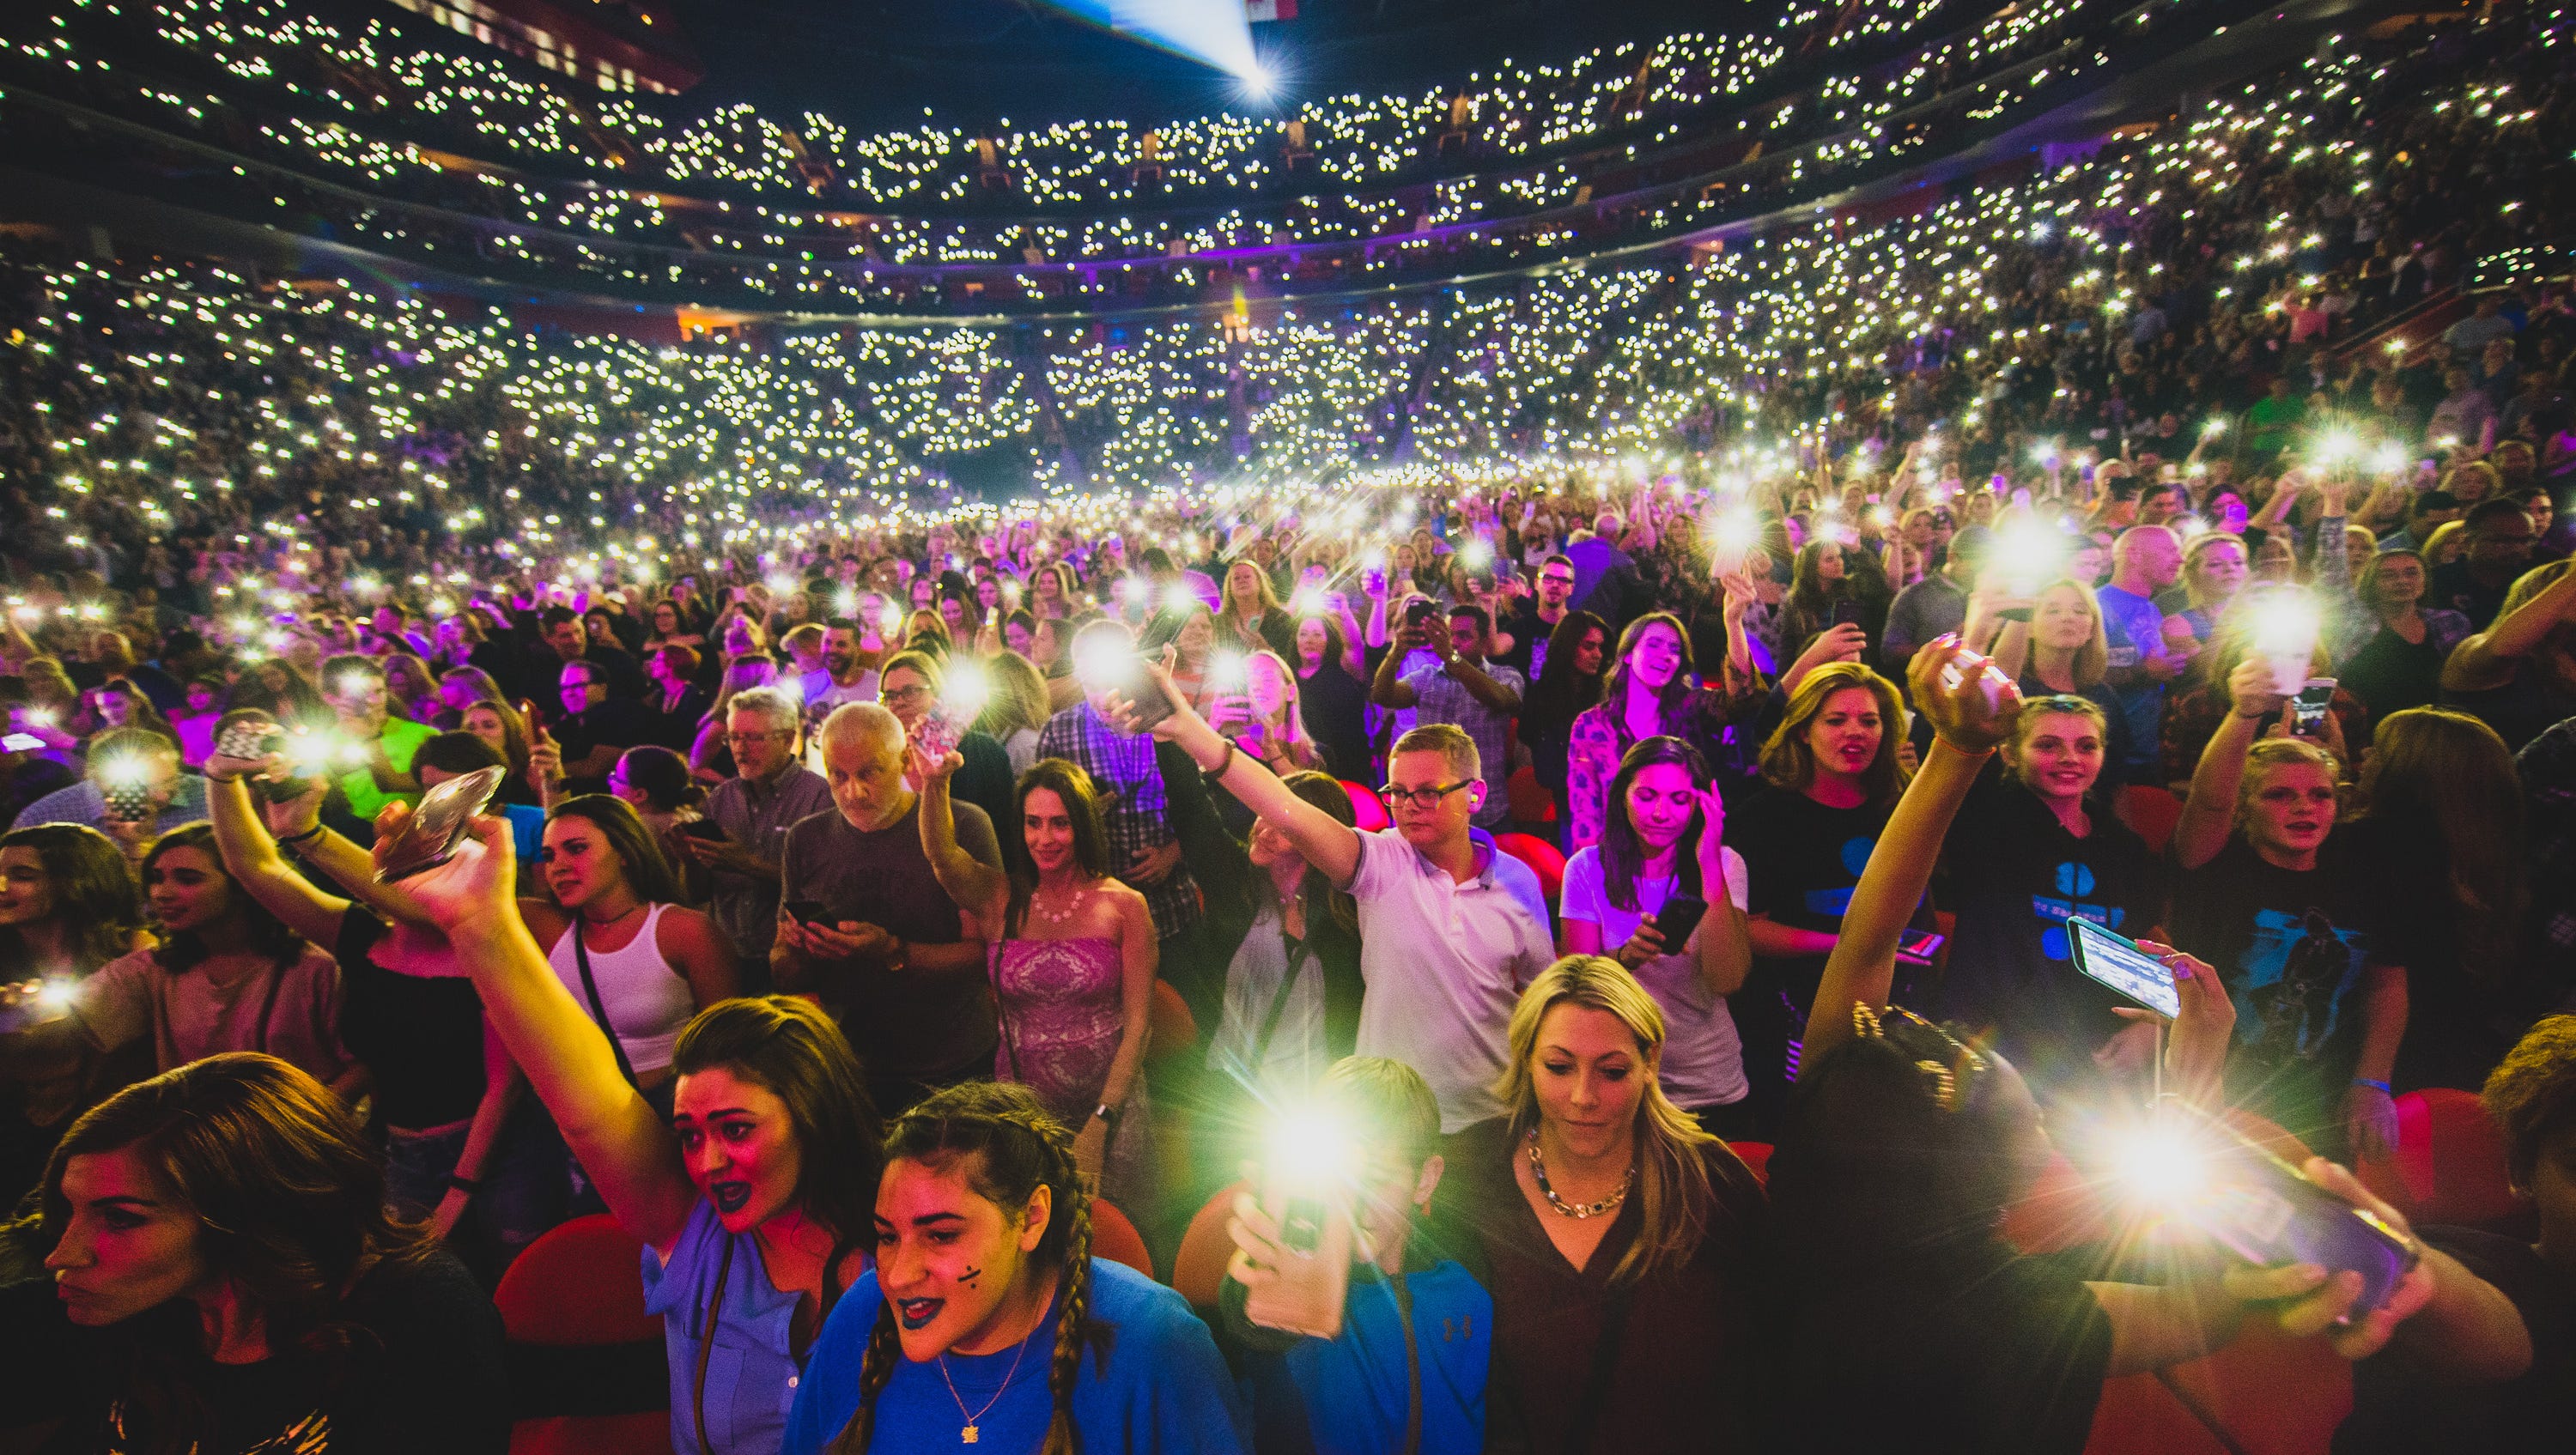 Fans light up their cellphone flash lights at a sold-out Ed Sheeran concert on September 27, 2017.